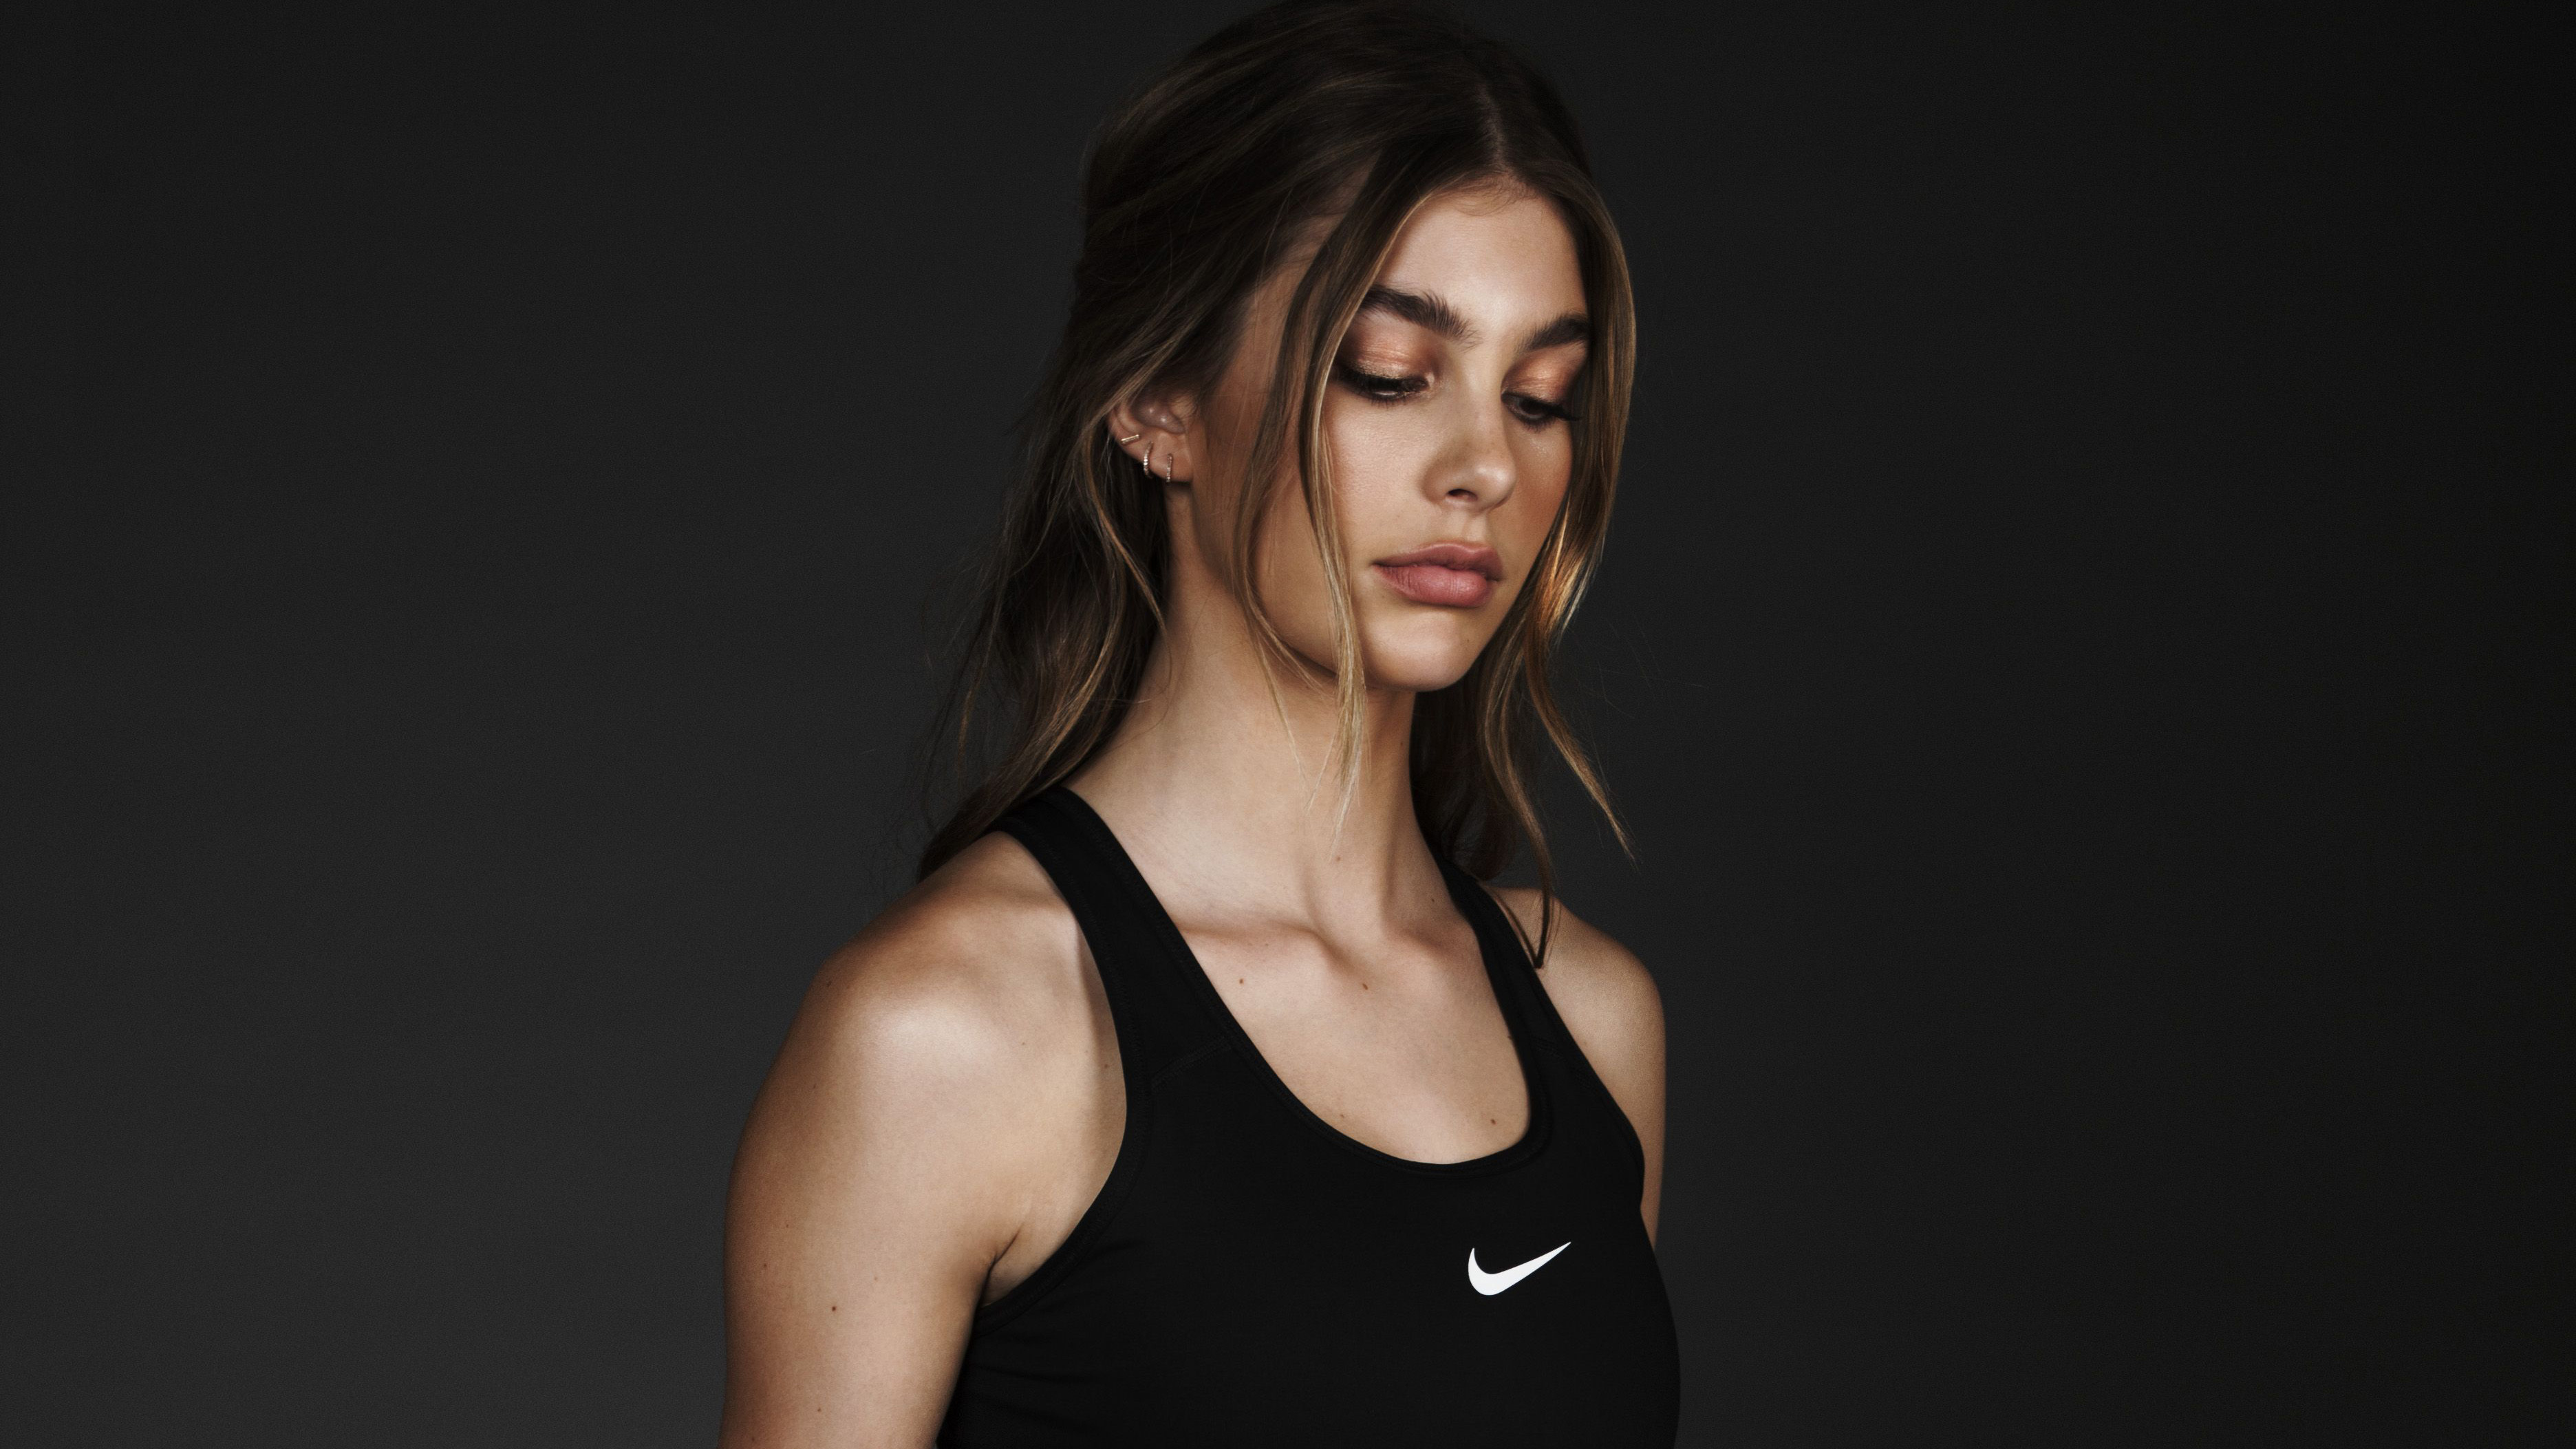 Camila Morrone 4k, HD Celebrities, 4k Wallpapers, Images